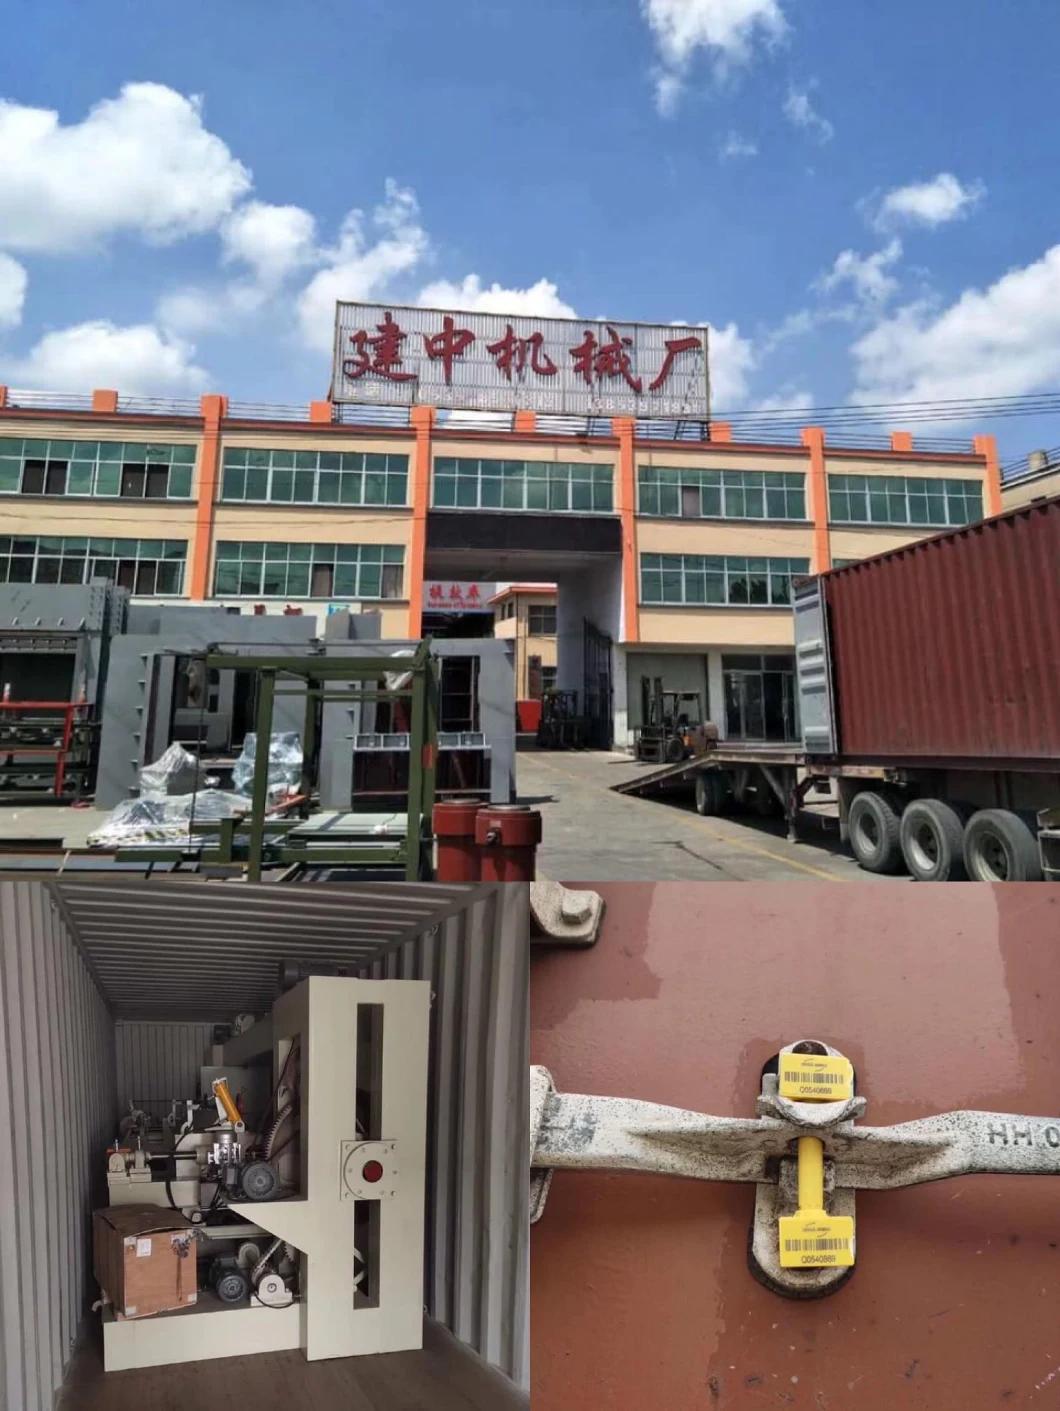 Multi-Functional Plywood Dryer Machine/Trustworthy Plywood Machine/Dryer Machinery/Various Machinery/Dryer for Plywood/Superb Quality